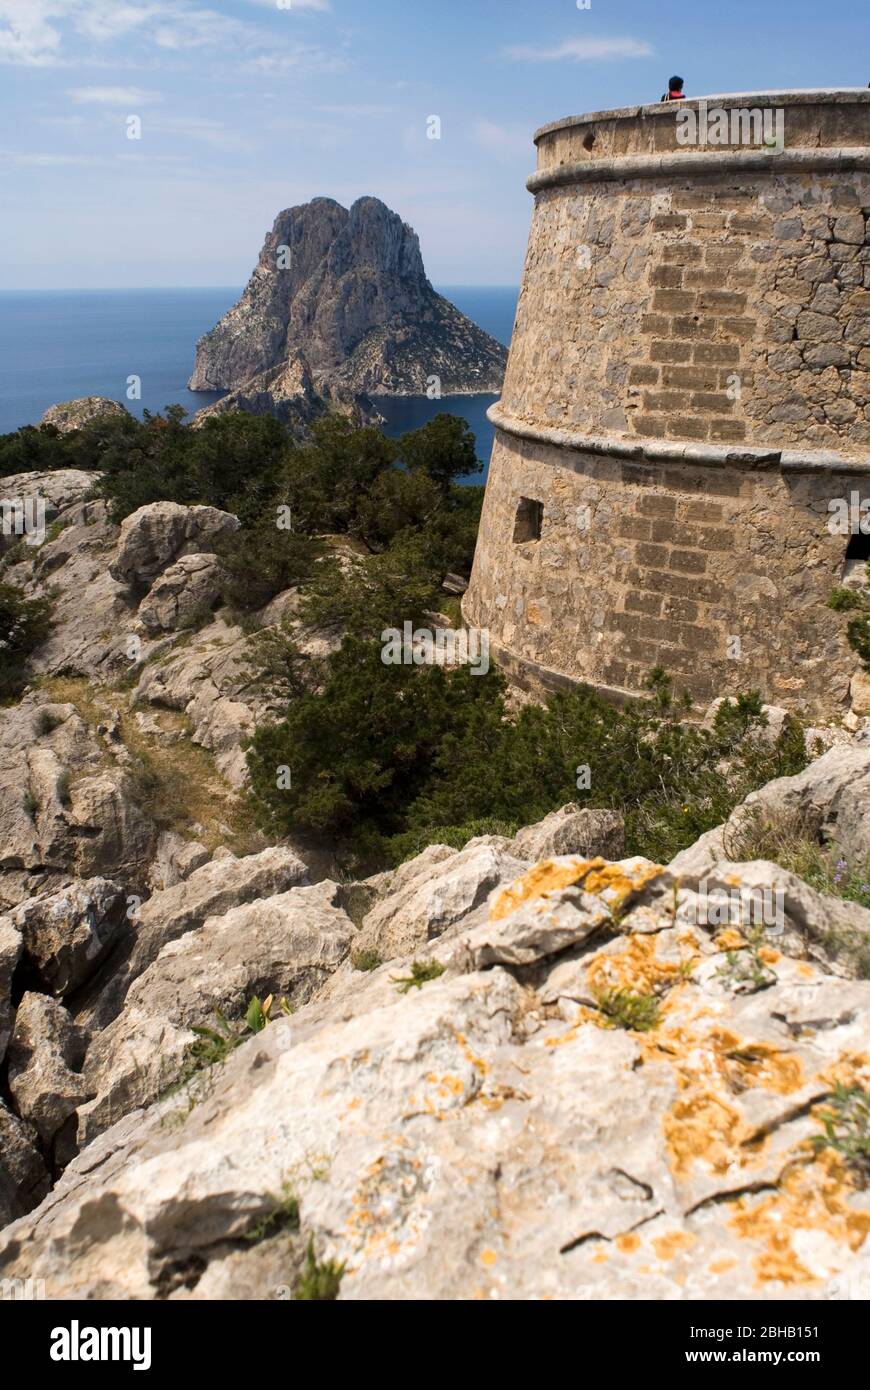 Panoramic view from the Torre des Savinar, Ibiza, Spain Stock Photo